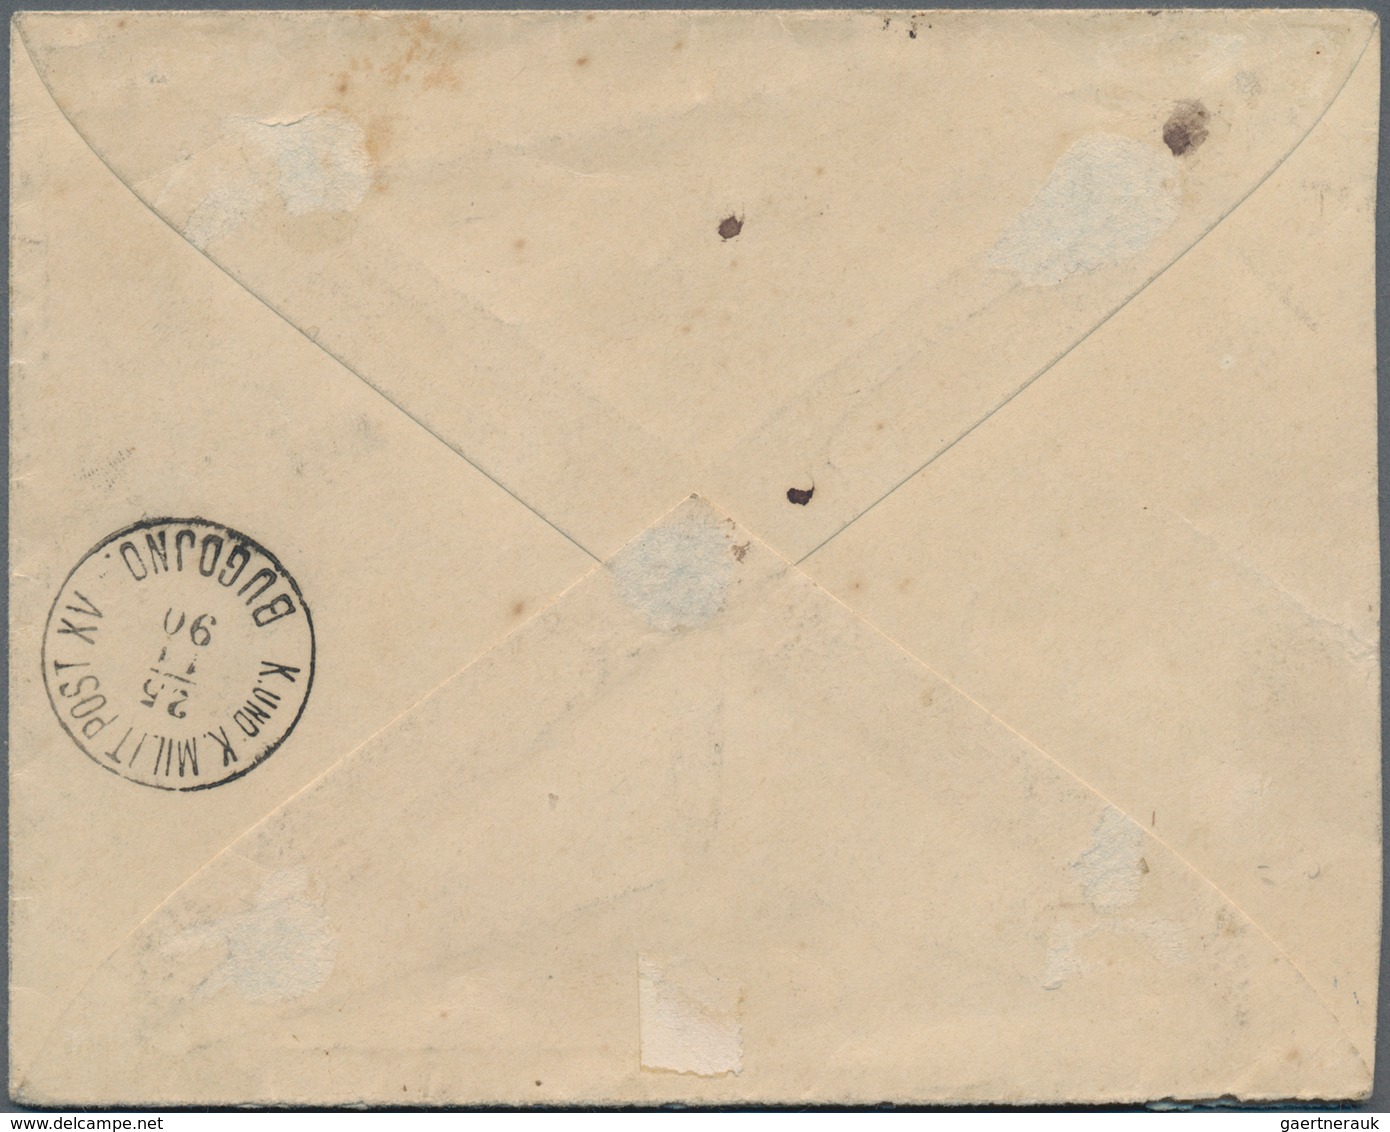 Montenegro: 1890, Registered Envelope To KUPRES, Bosnia Franked With 1879 Second Printing 2n Yellow - Montenegro